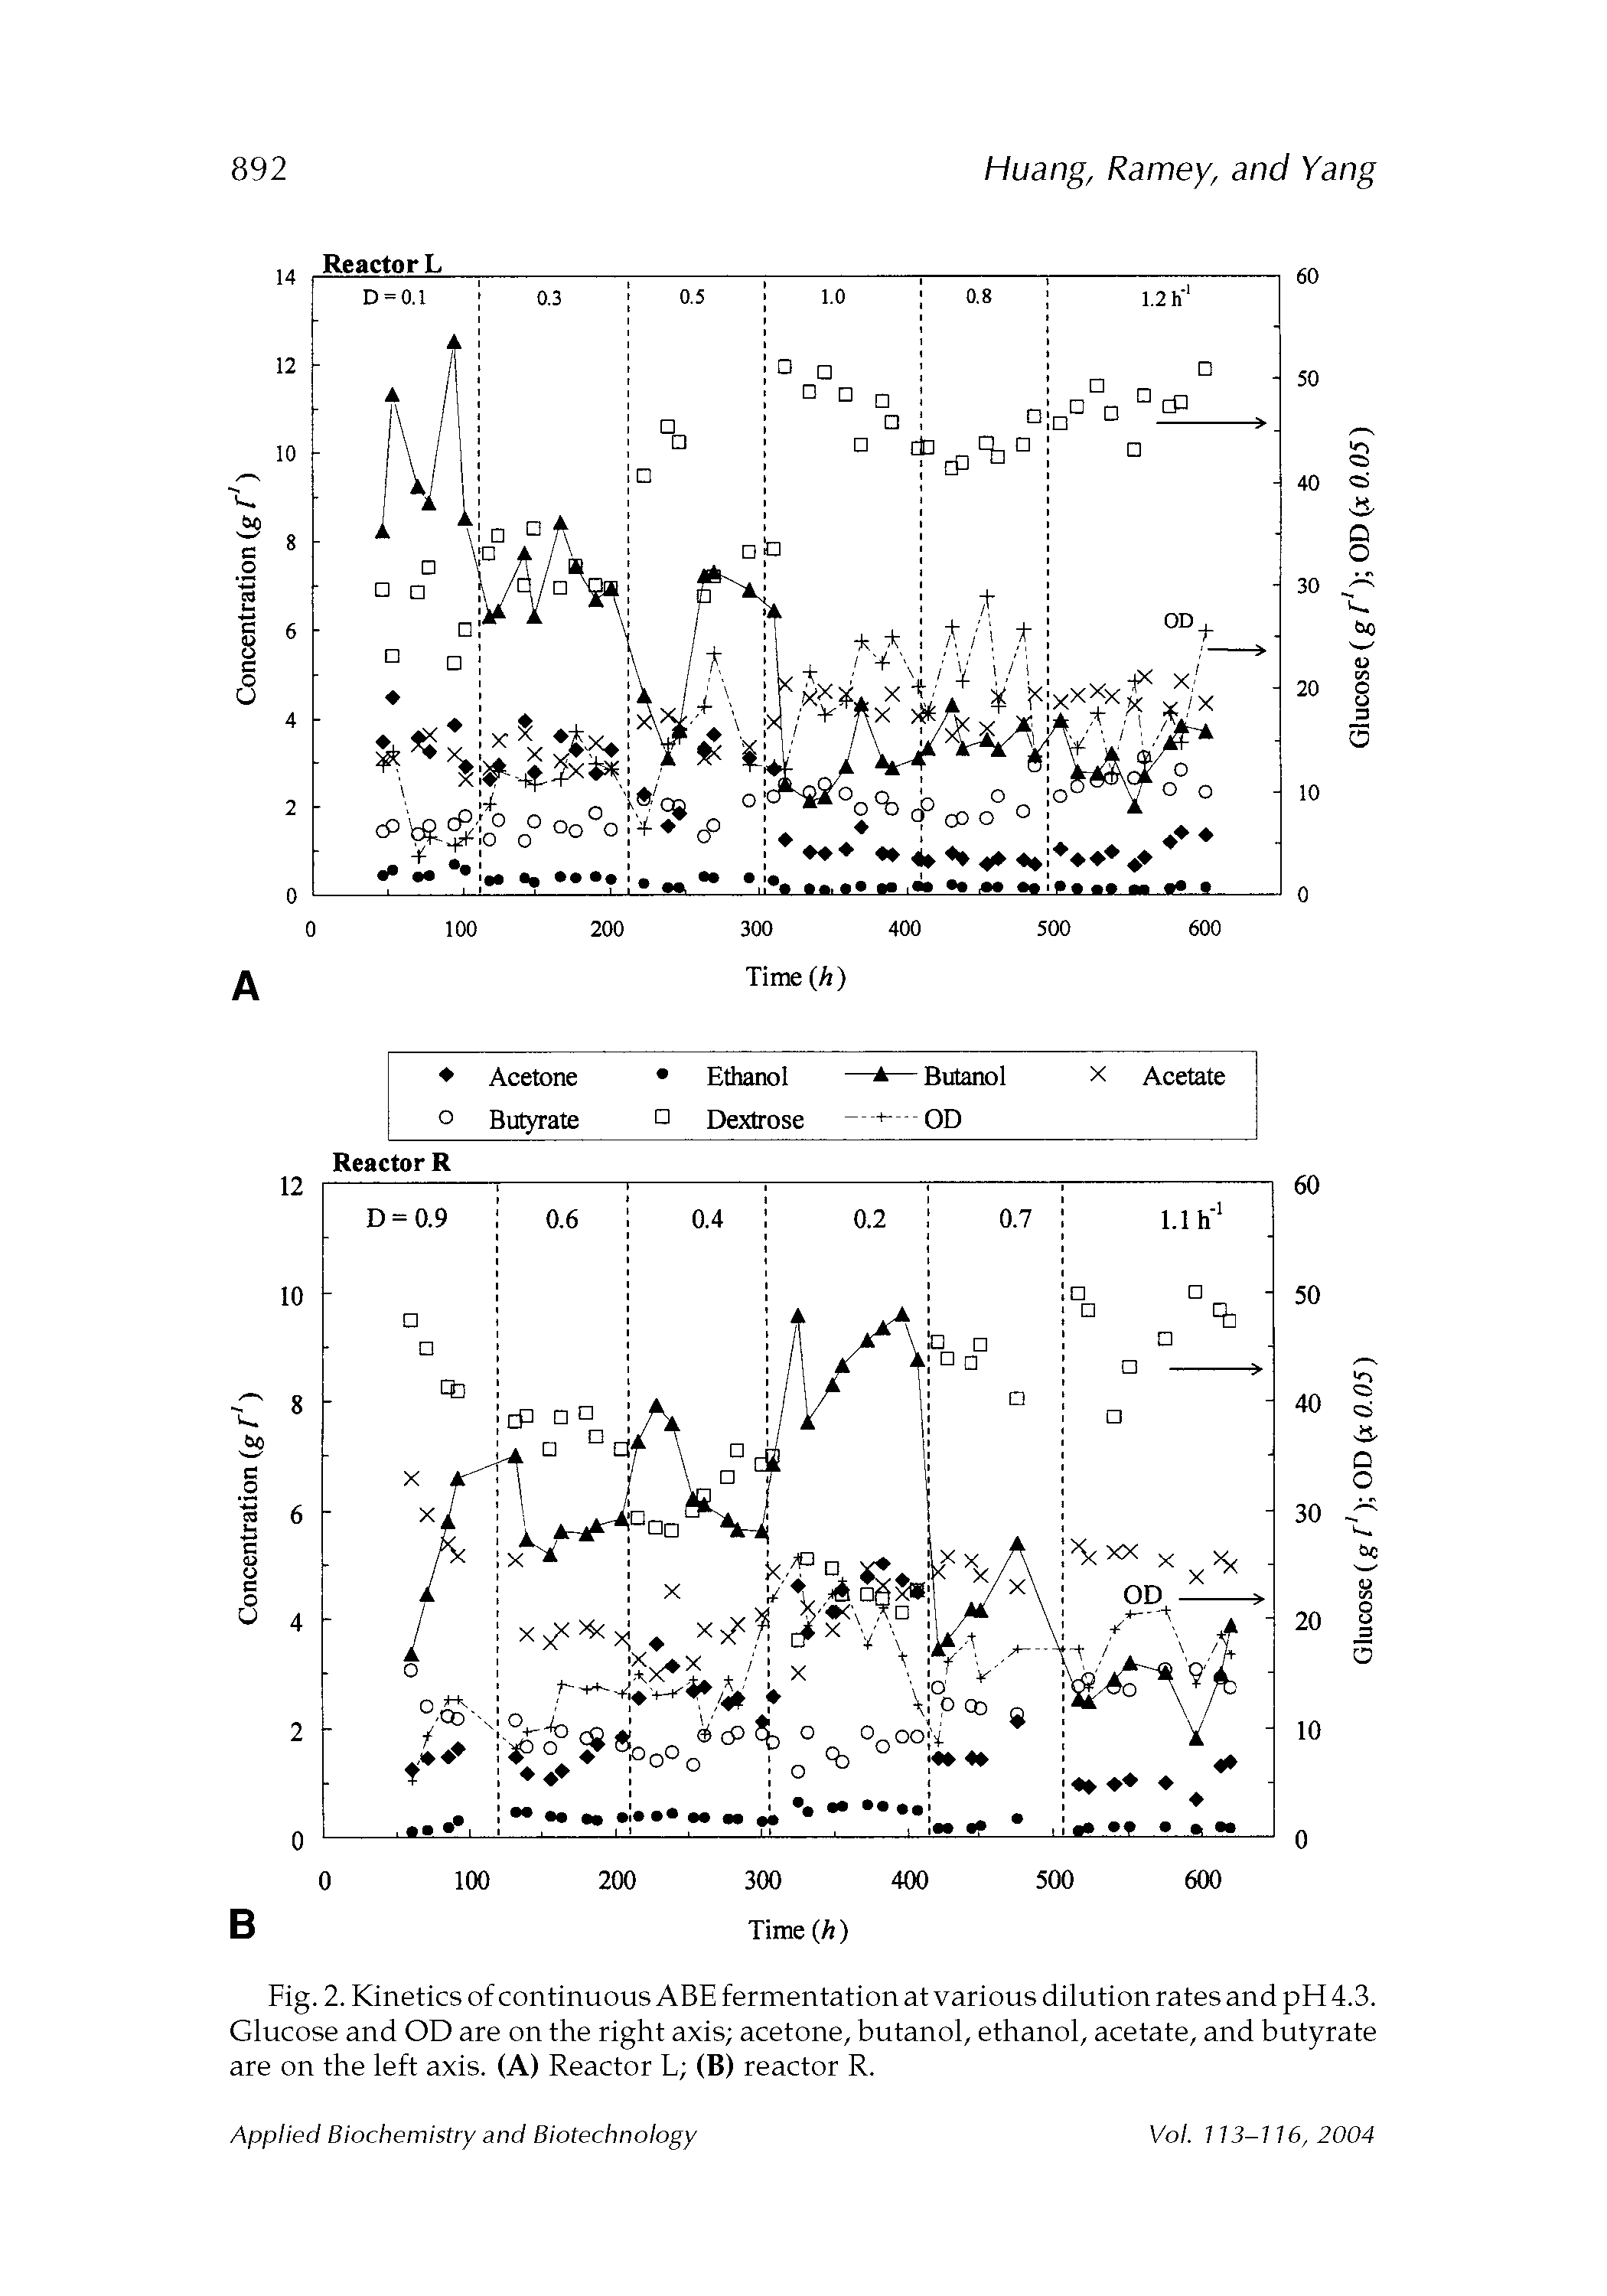 Fig. 2. Kinetics of continuous ABE fermentation at various dilution rates and pH 4.3. Glucose and OD are on the right axis acetone, butanol, ethanol, acetate, and butyrate are on the left axis. (A) Reactor L (B) reactor R.